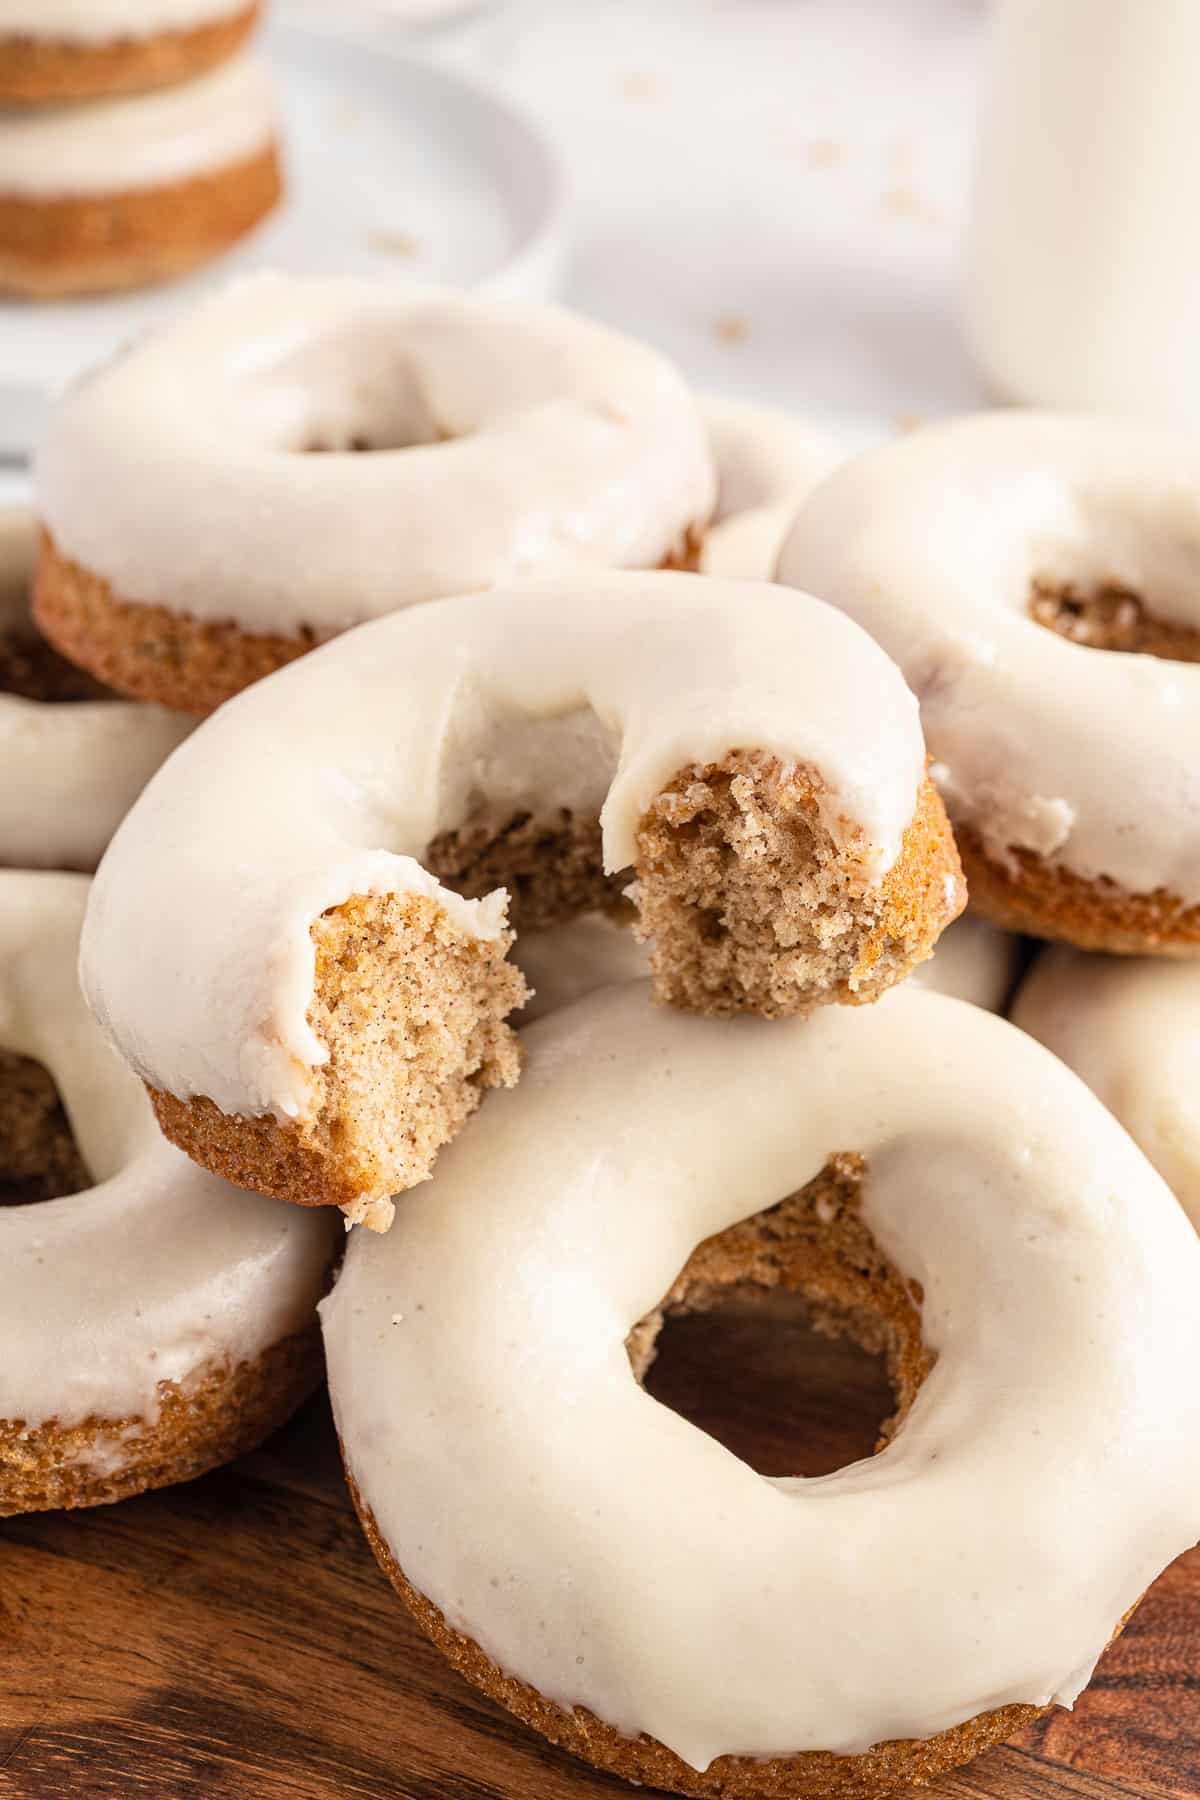 Maple Glaze for Doughnuts Recipe: How to Make It